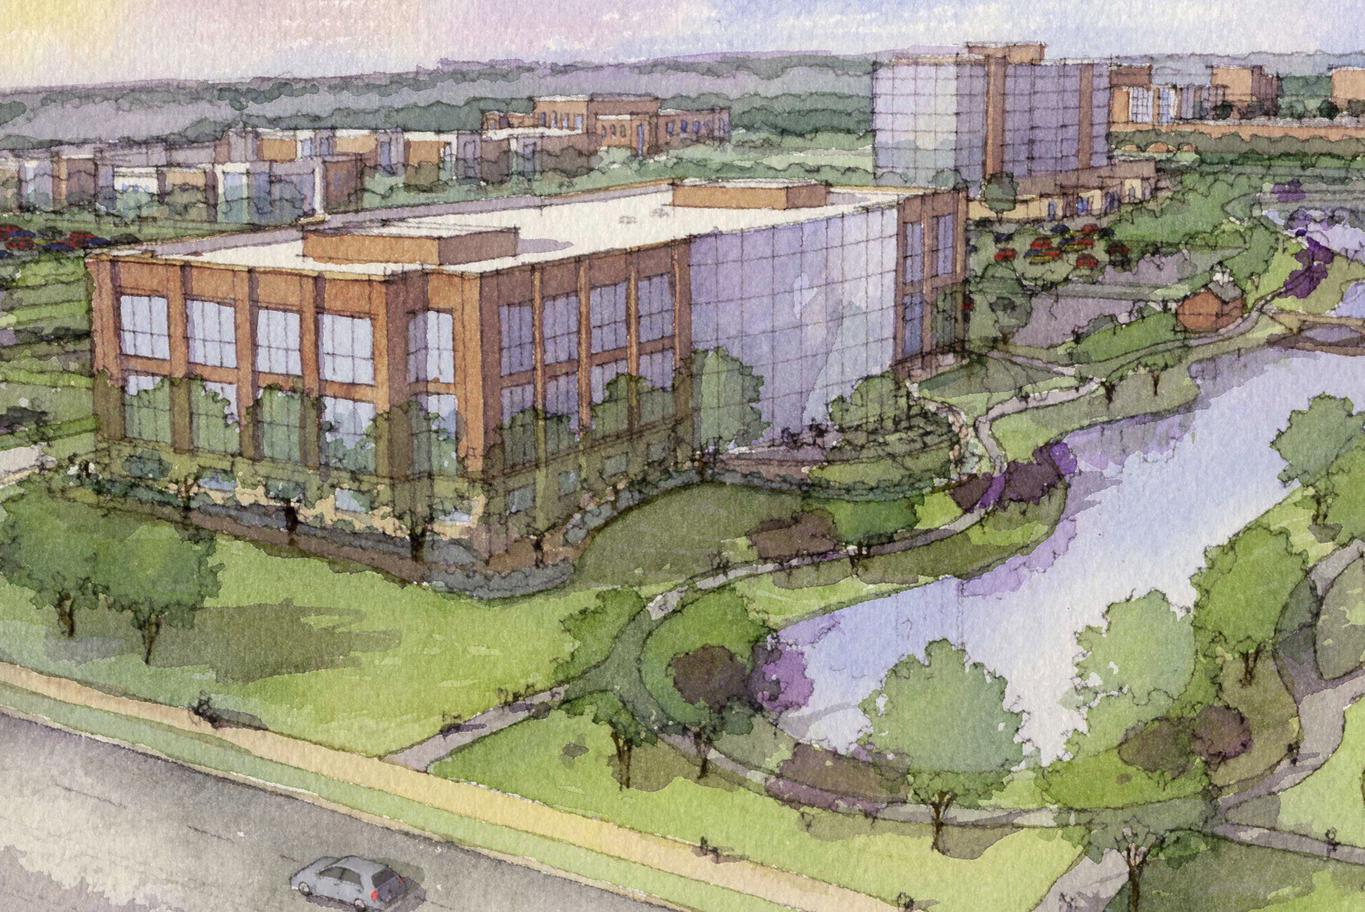 Concept drawing of Westar in Westerville, Ohio.